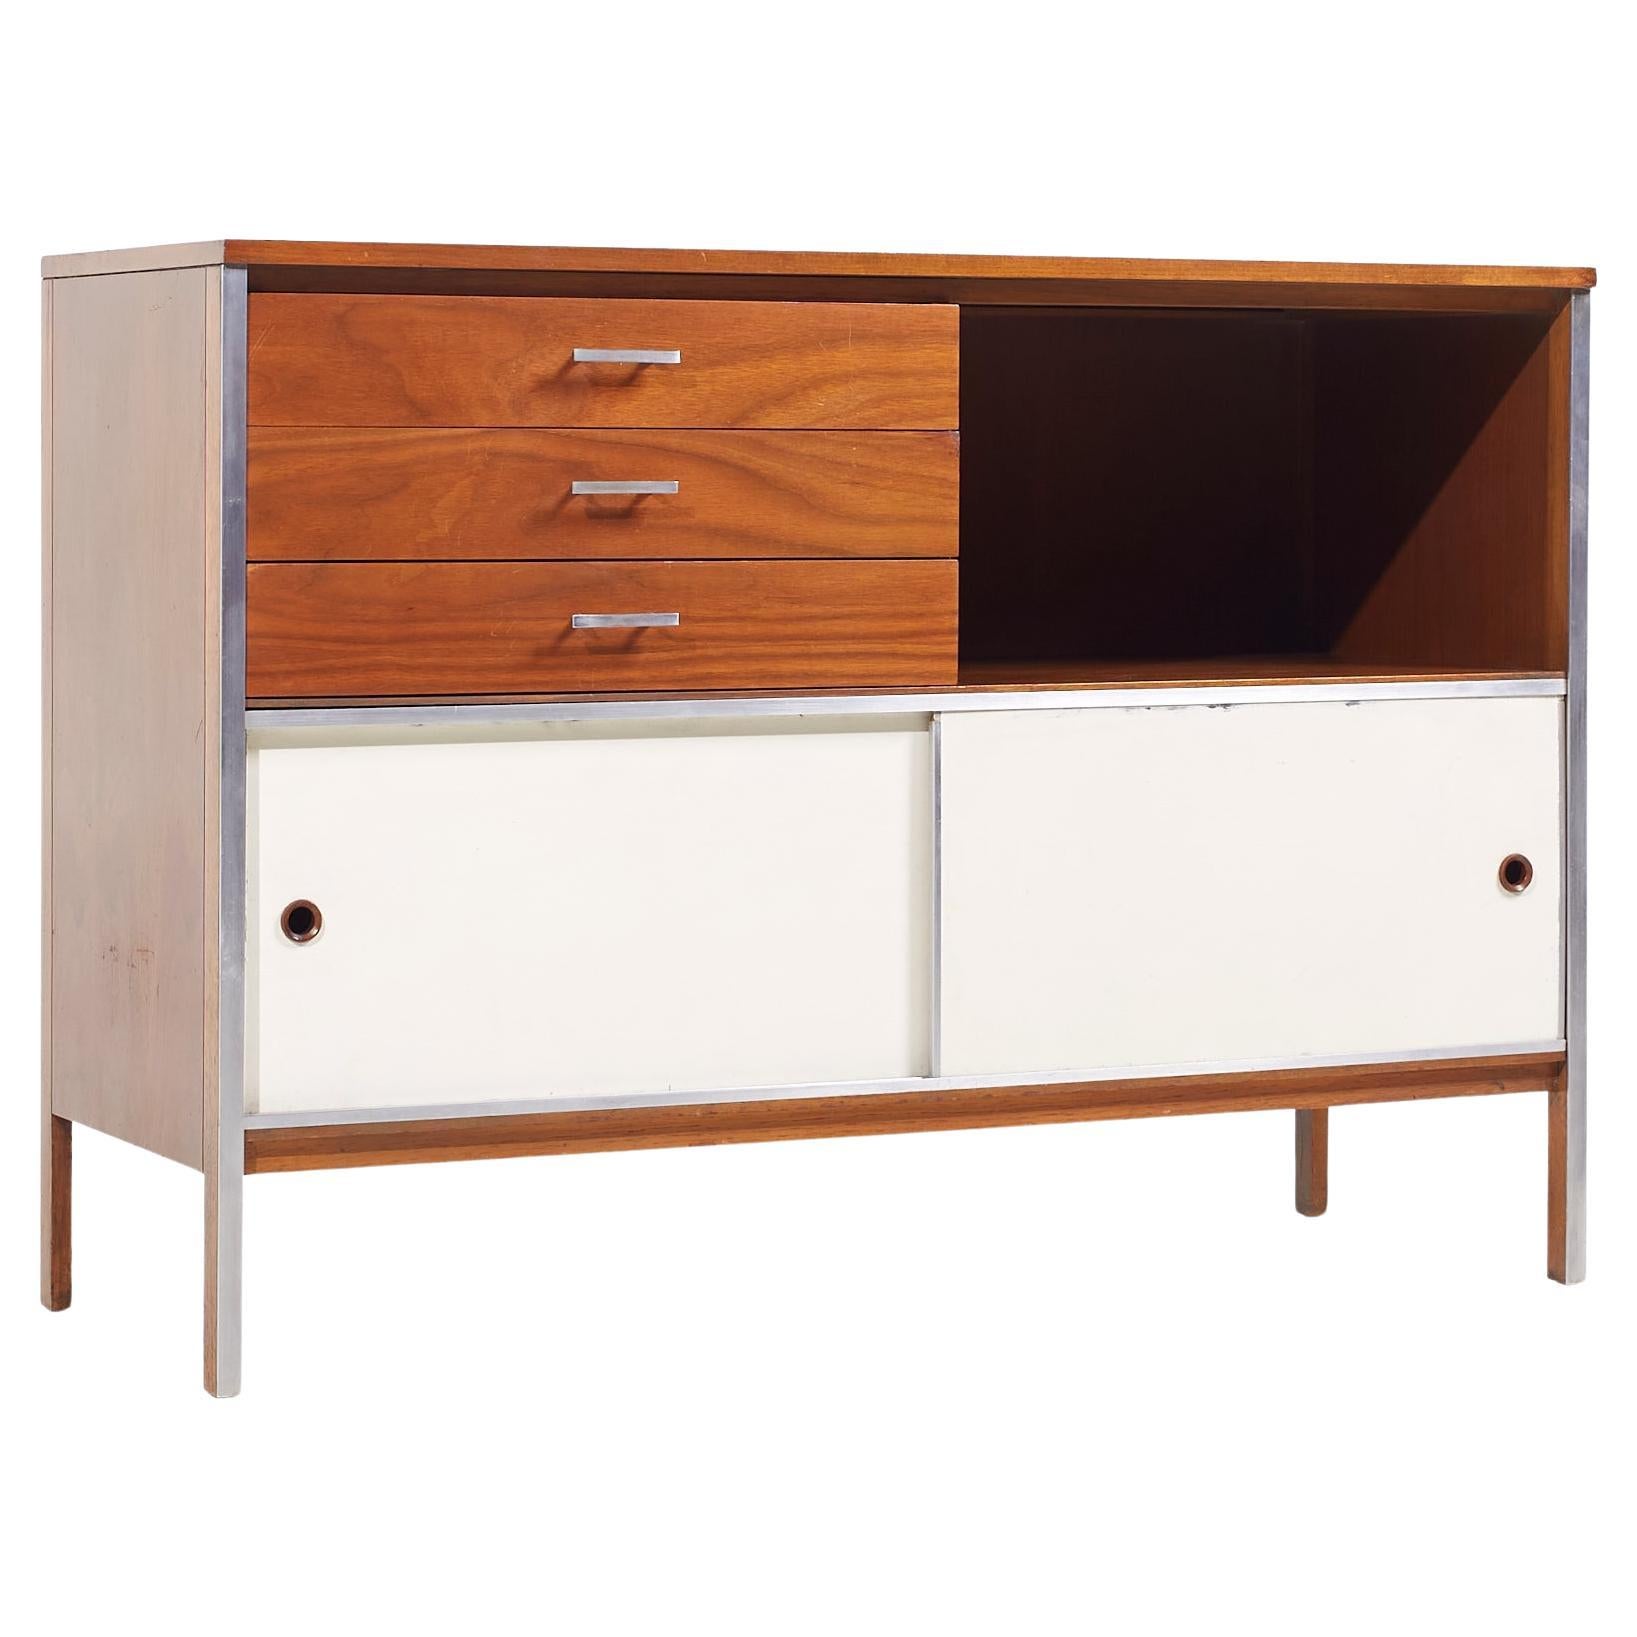 Paul McCobb for Calvin MCM Walnut and Stainless Steel Sliding Door Credenza For Sale